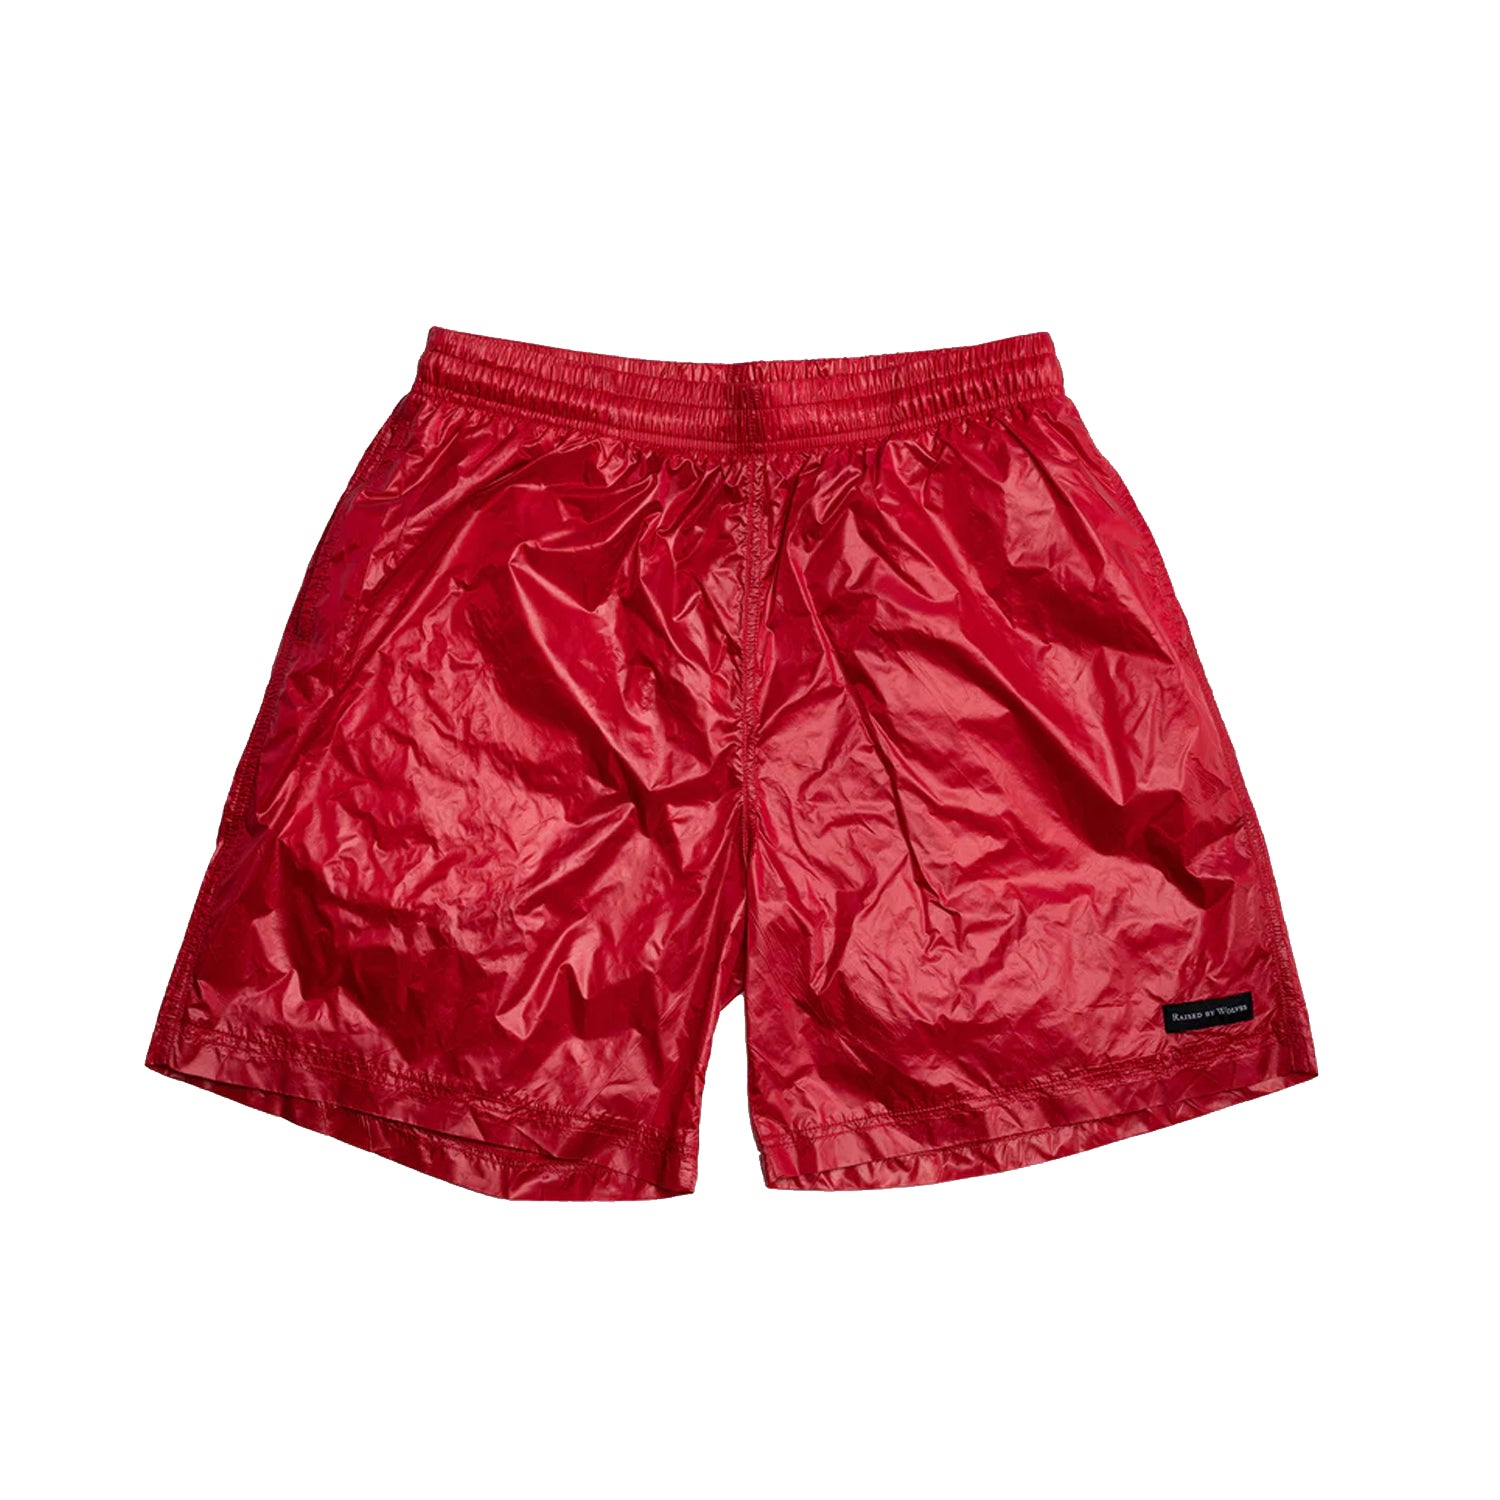 Ultra Light Ripstop Shorts RED

Made in Canada
ULTRA-LIGHTWEIGHT, BREATHABLE RIPSTOP NYLON WITH DWR
HAND POCKETS
ZIP BACK POCKET
 RAISED BY WOLVES